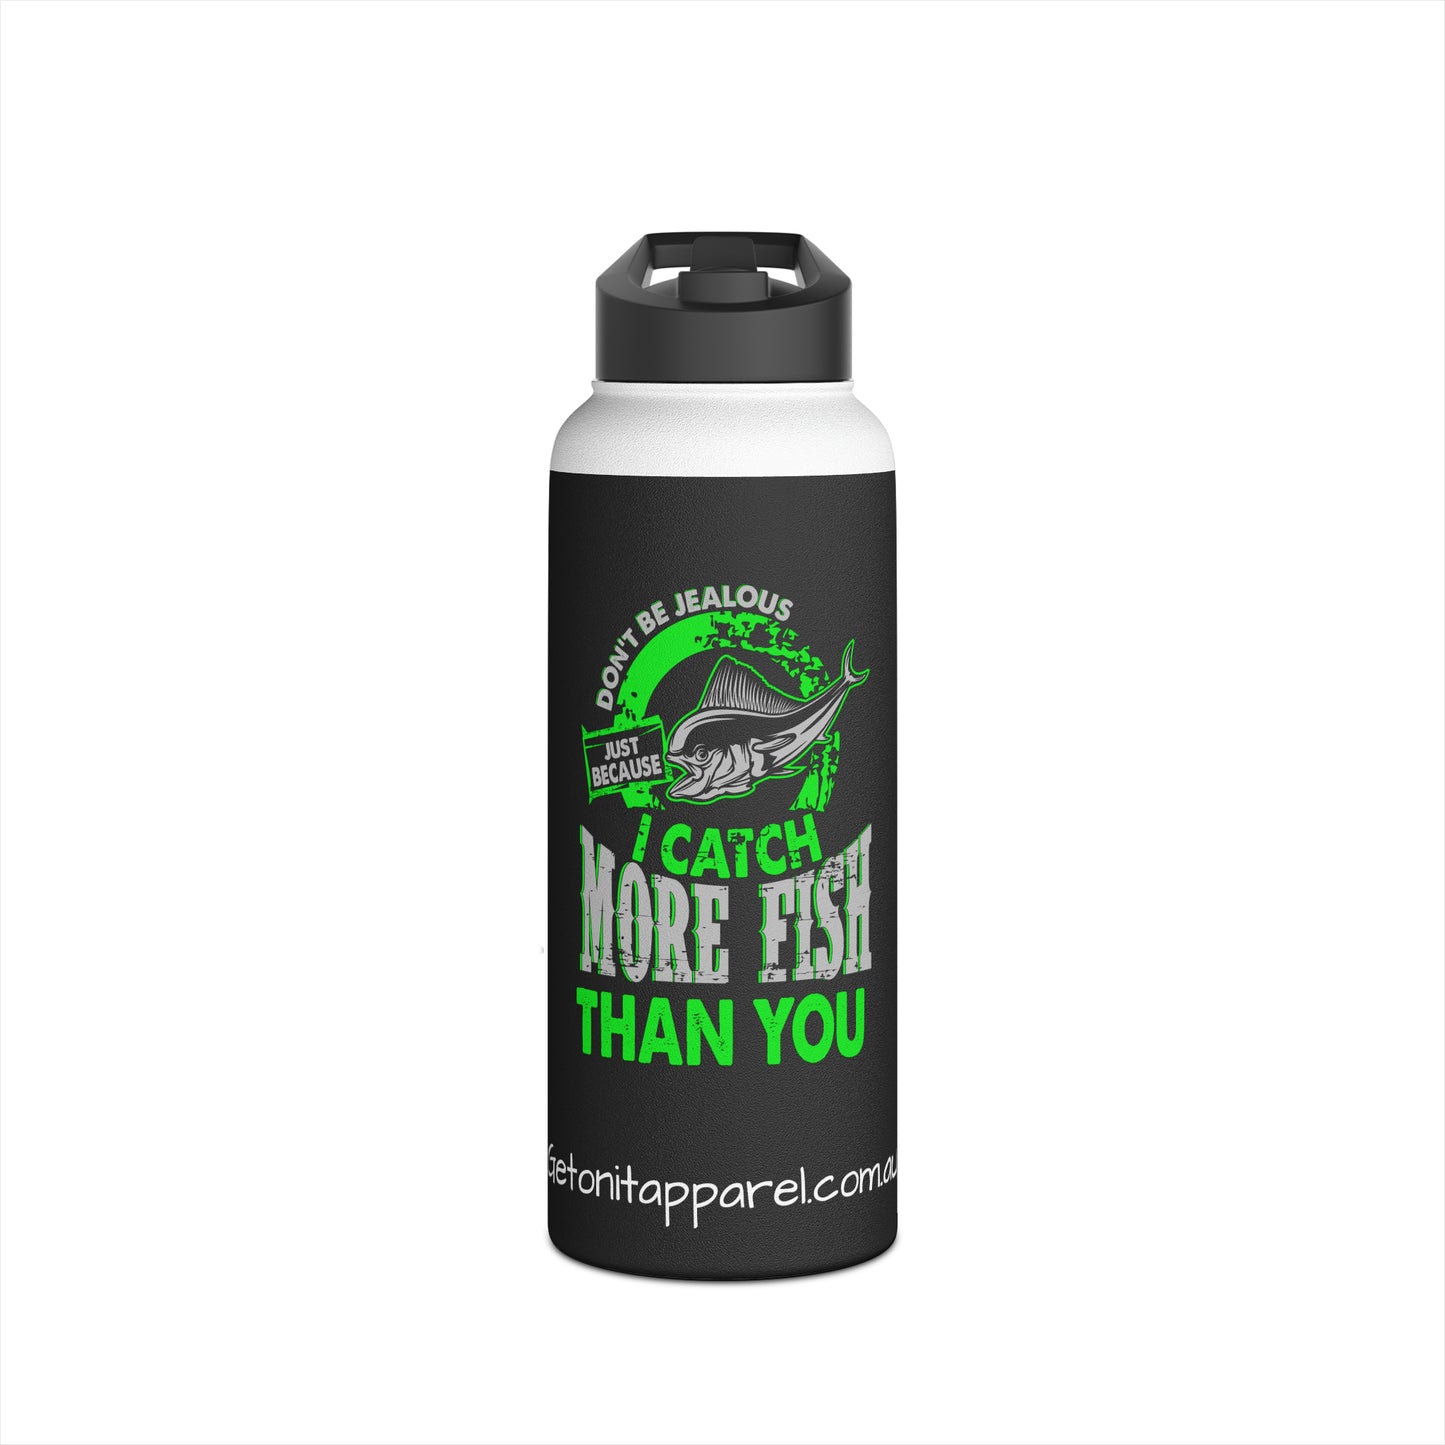 Stainless Steel Water Bottle - Don't Be Jealous Just Because I Catch More Fish Than You